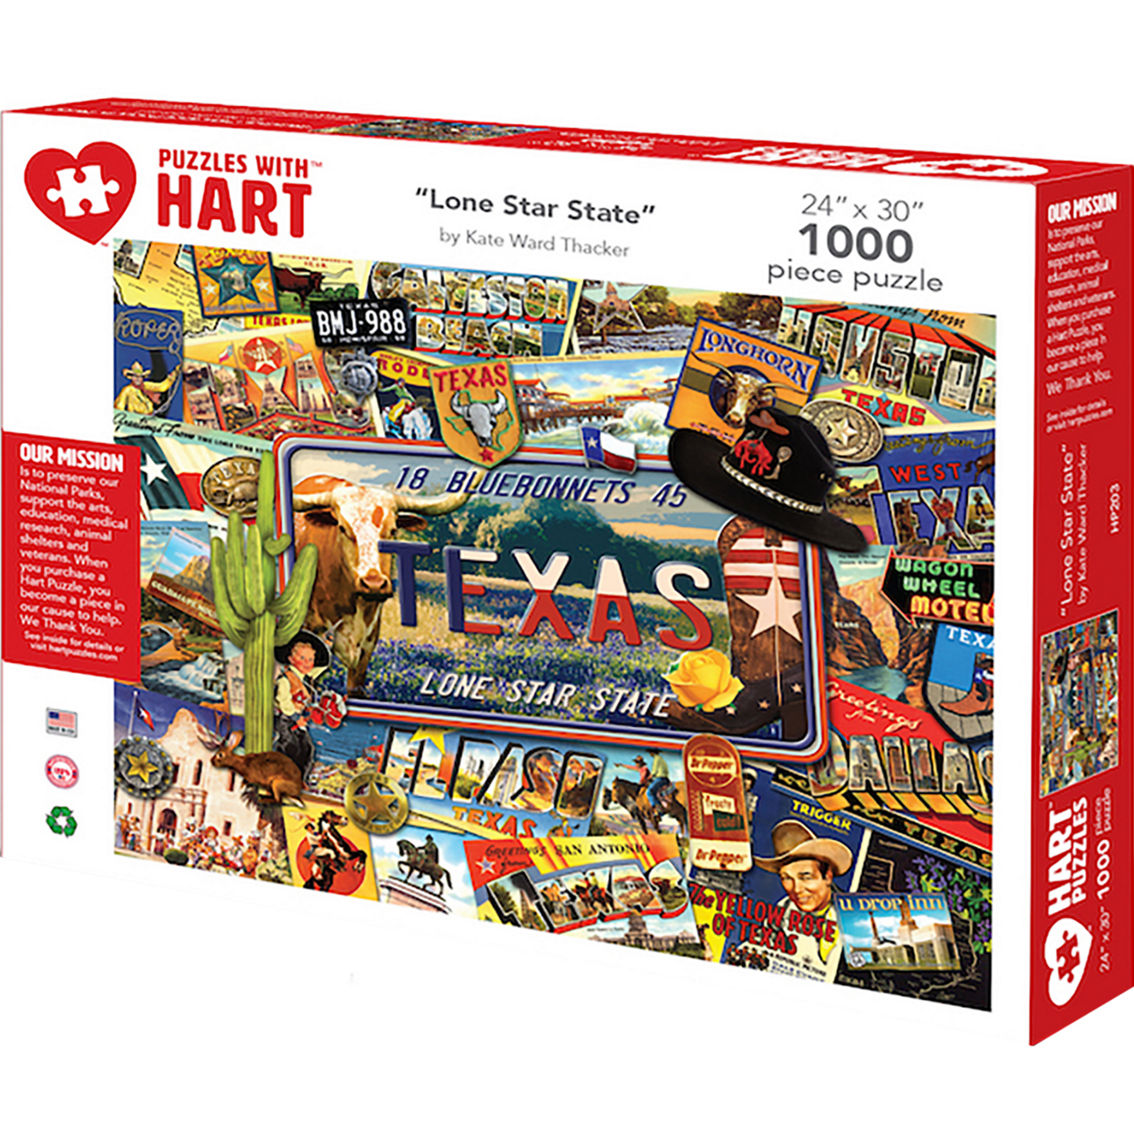 Hart Puzzles Lone Star State 1,000 pc. Puzzle - Image 2 of 6